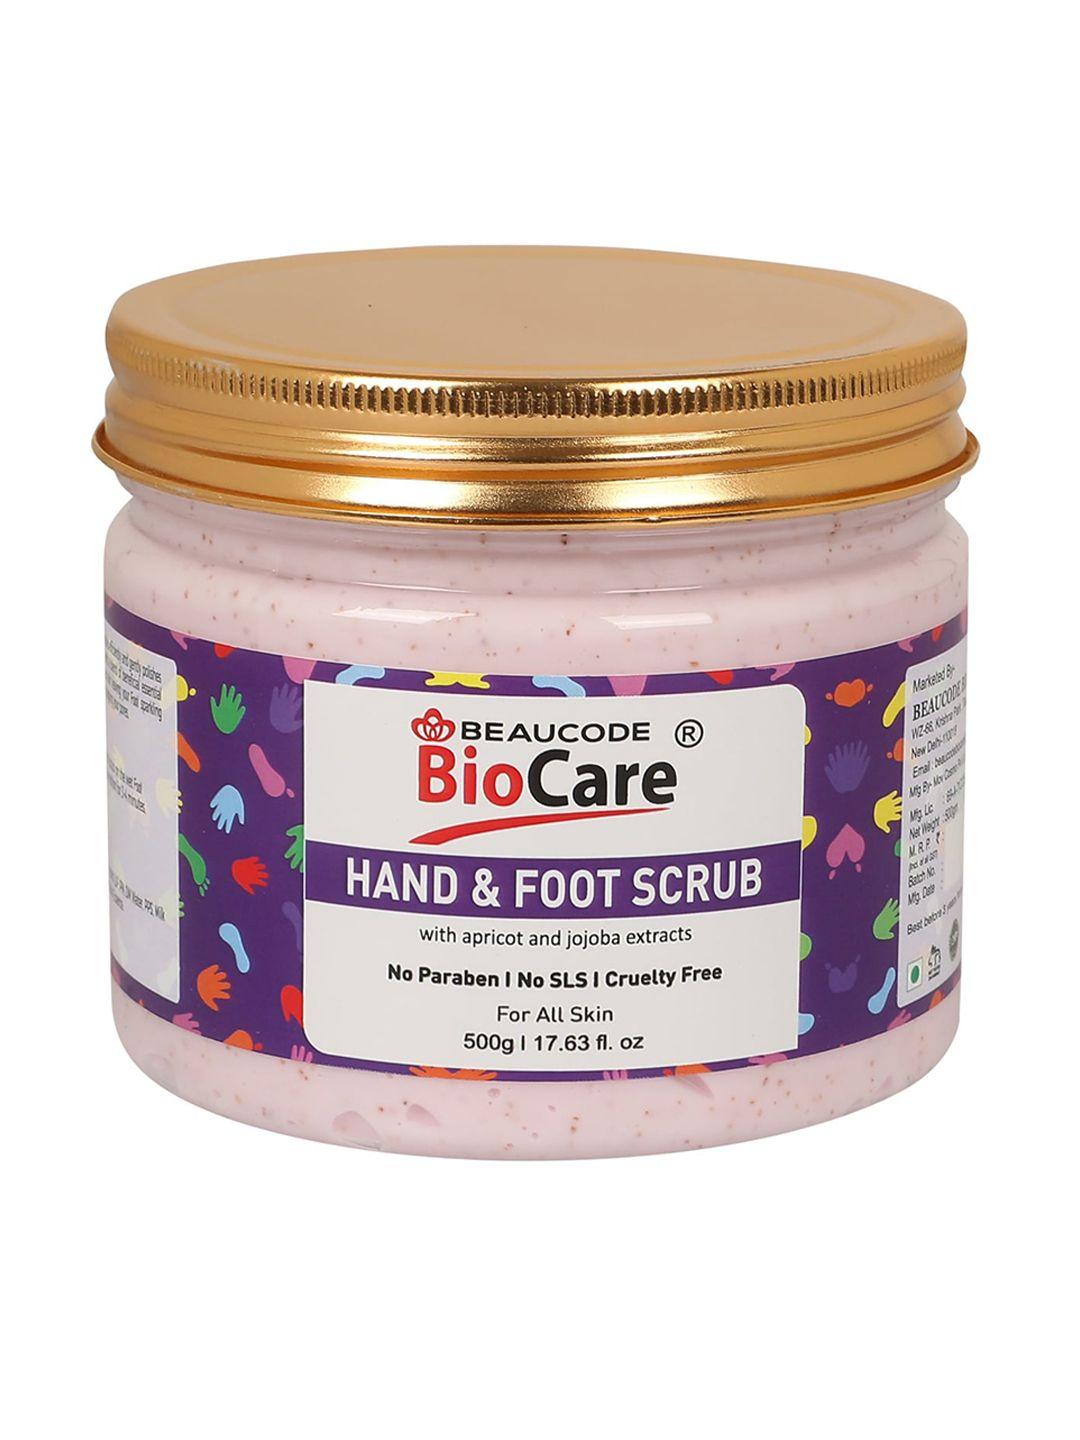 beaucode biocare hand & foot scrub with apricot & jojoba extracts - 500g